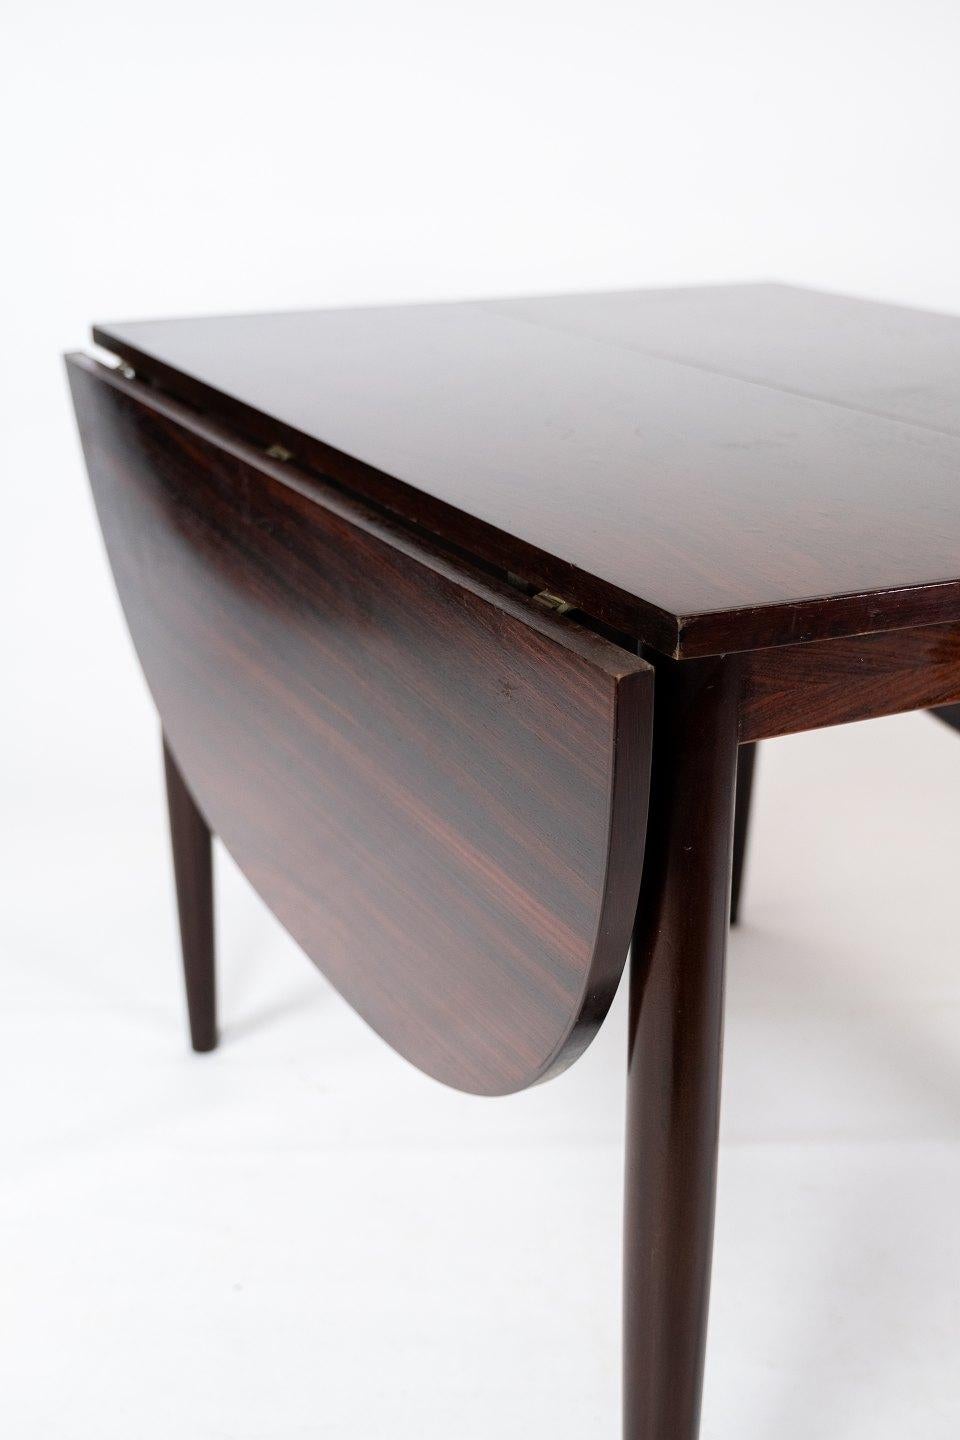 Mid-20th Century Dining Table in Rosewood with Extensions Designed by Arne Vodder from the 1960s For Sale